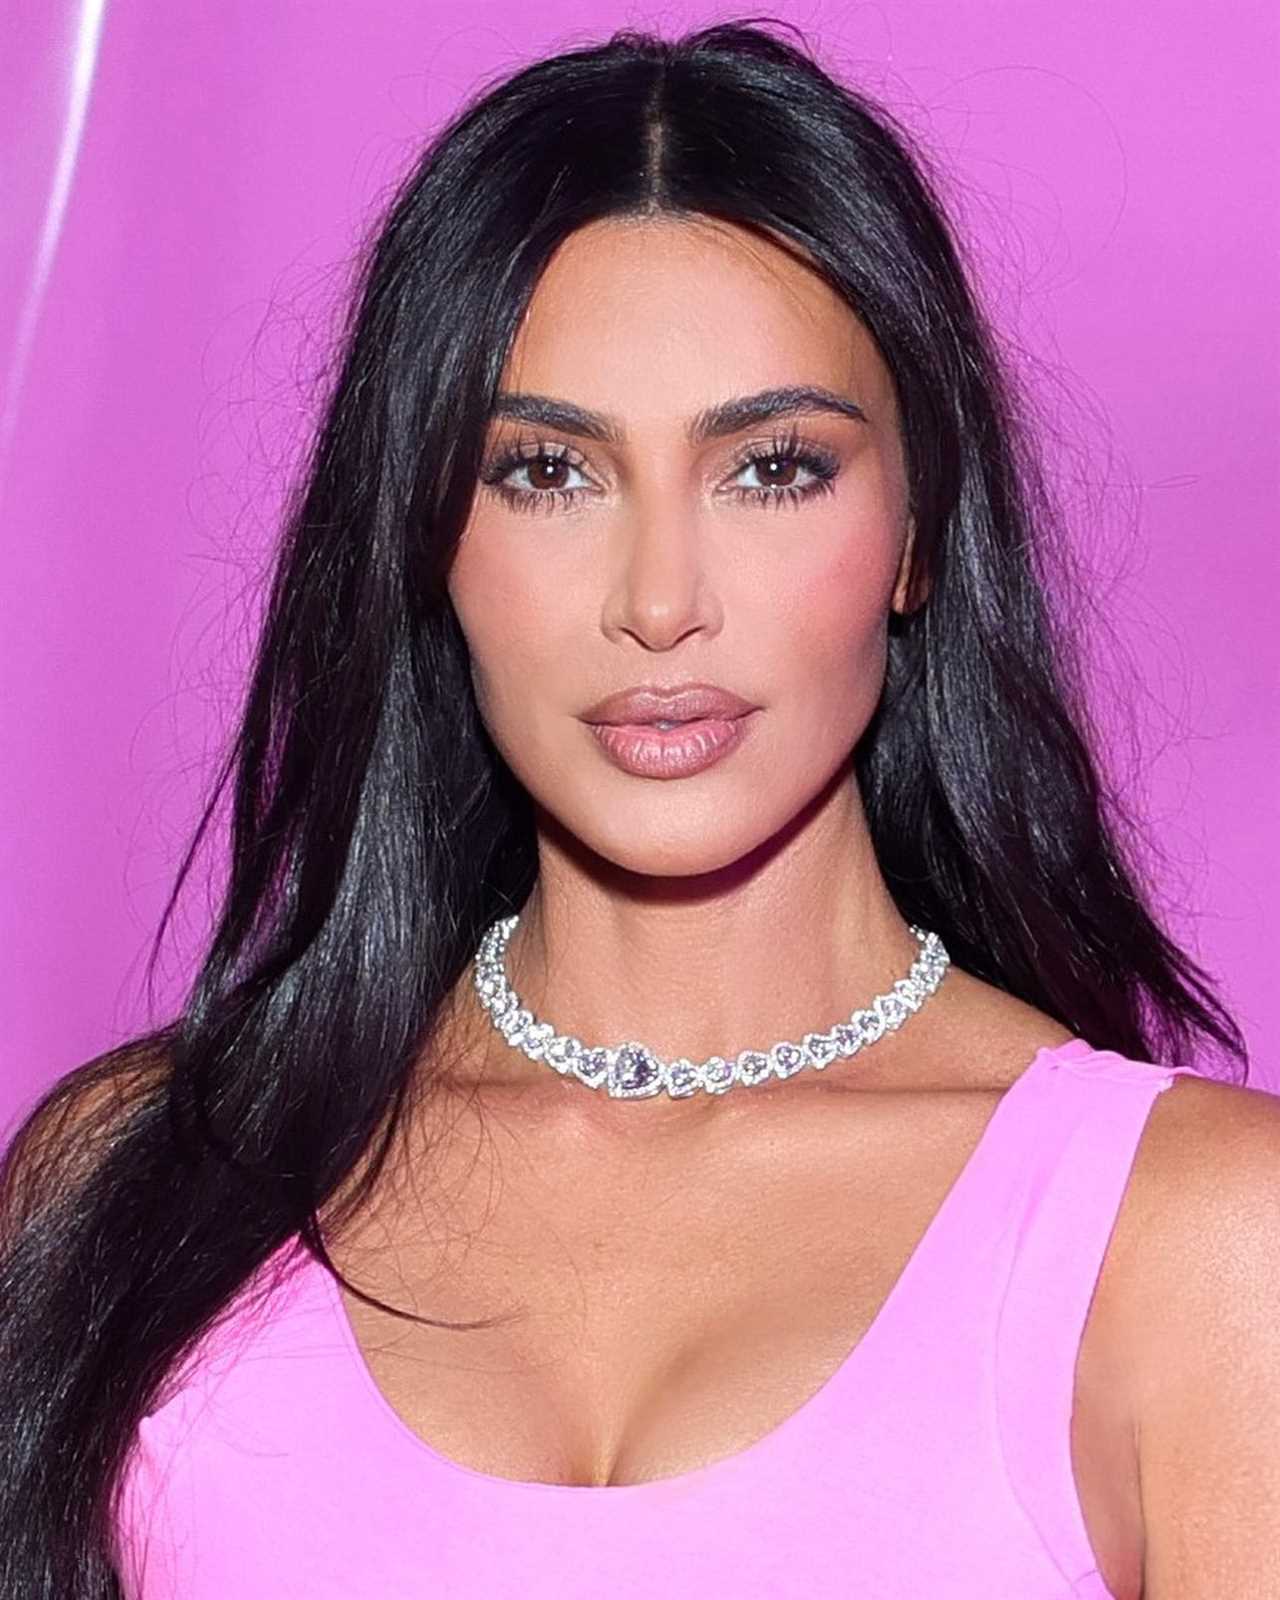 Kim Kardashian looks completely unrecognizable before ‘plastic surgery’ in throwback photo with famous friends